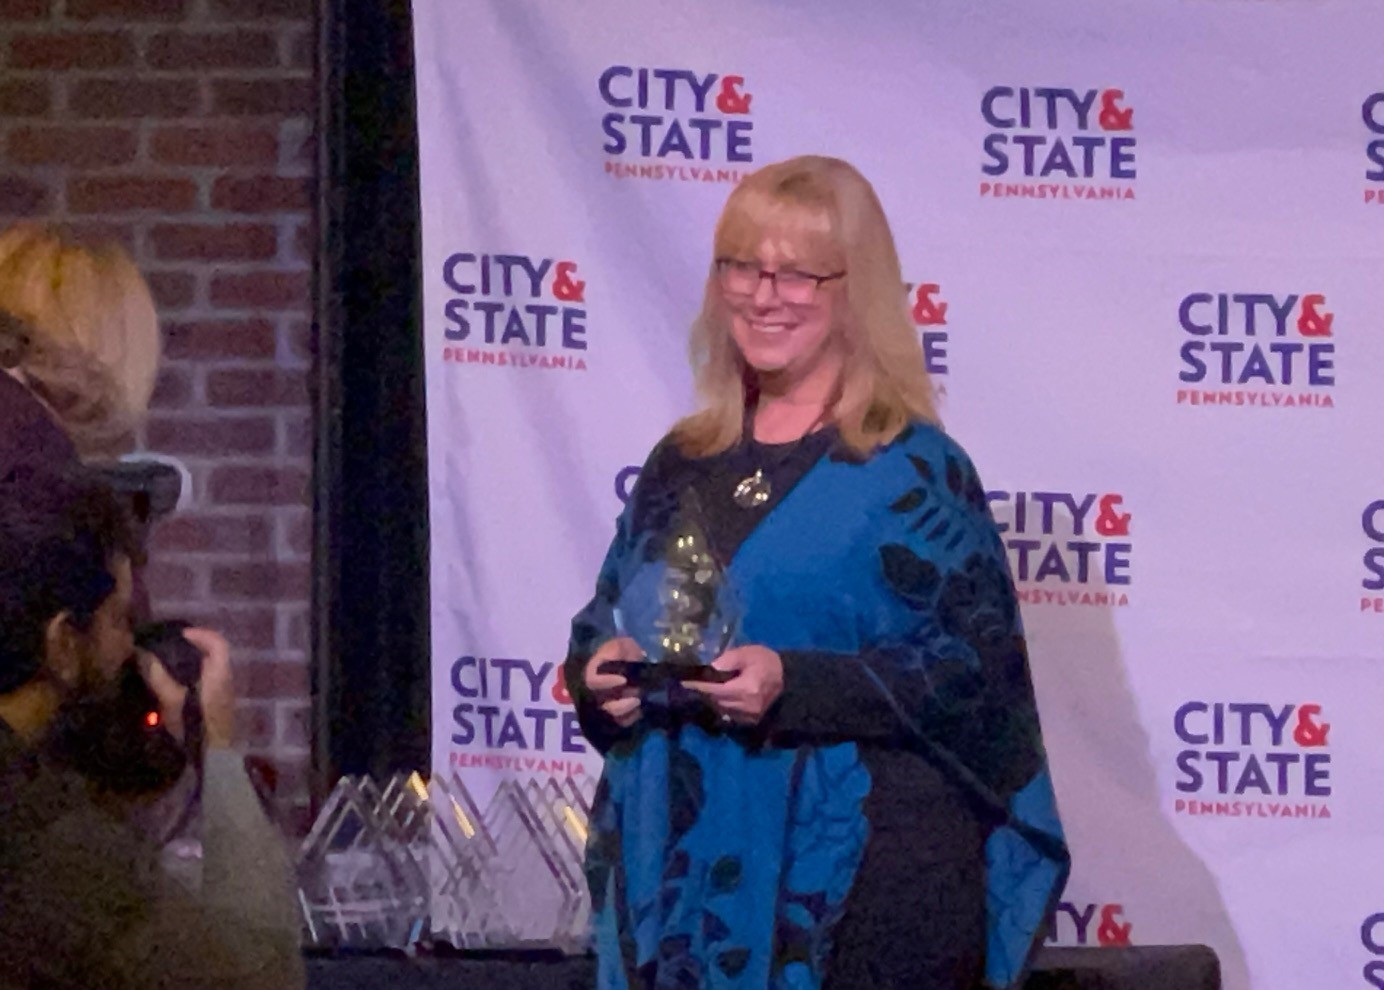 Gawthrop Greenwood partner Stacey Fuller appears in City & State Magazine to accept the Above and Beyond award